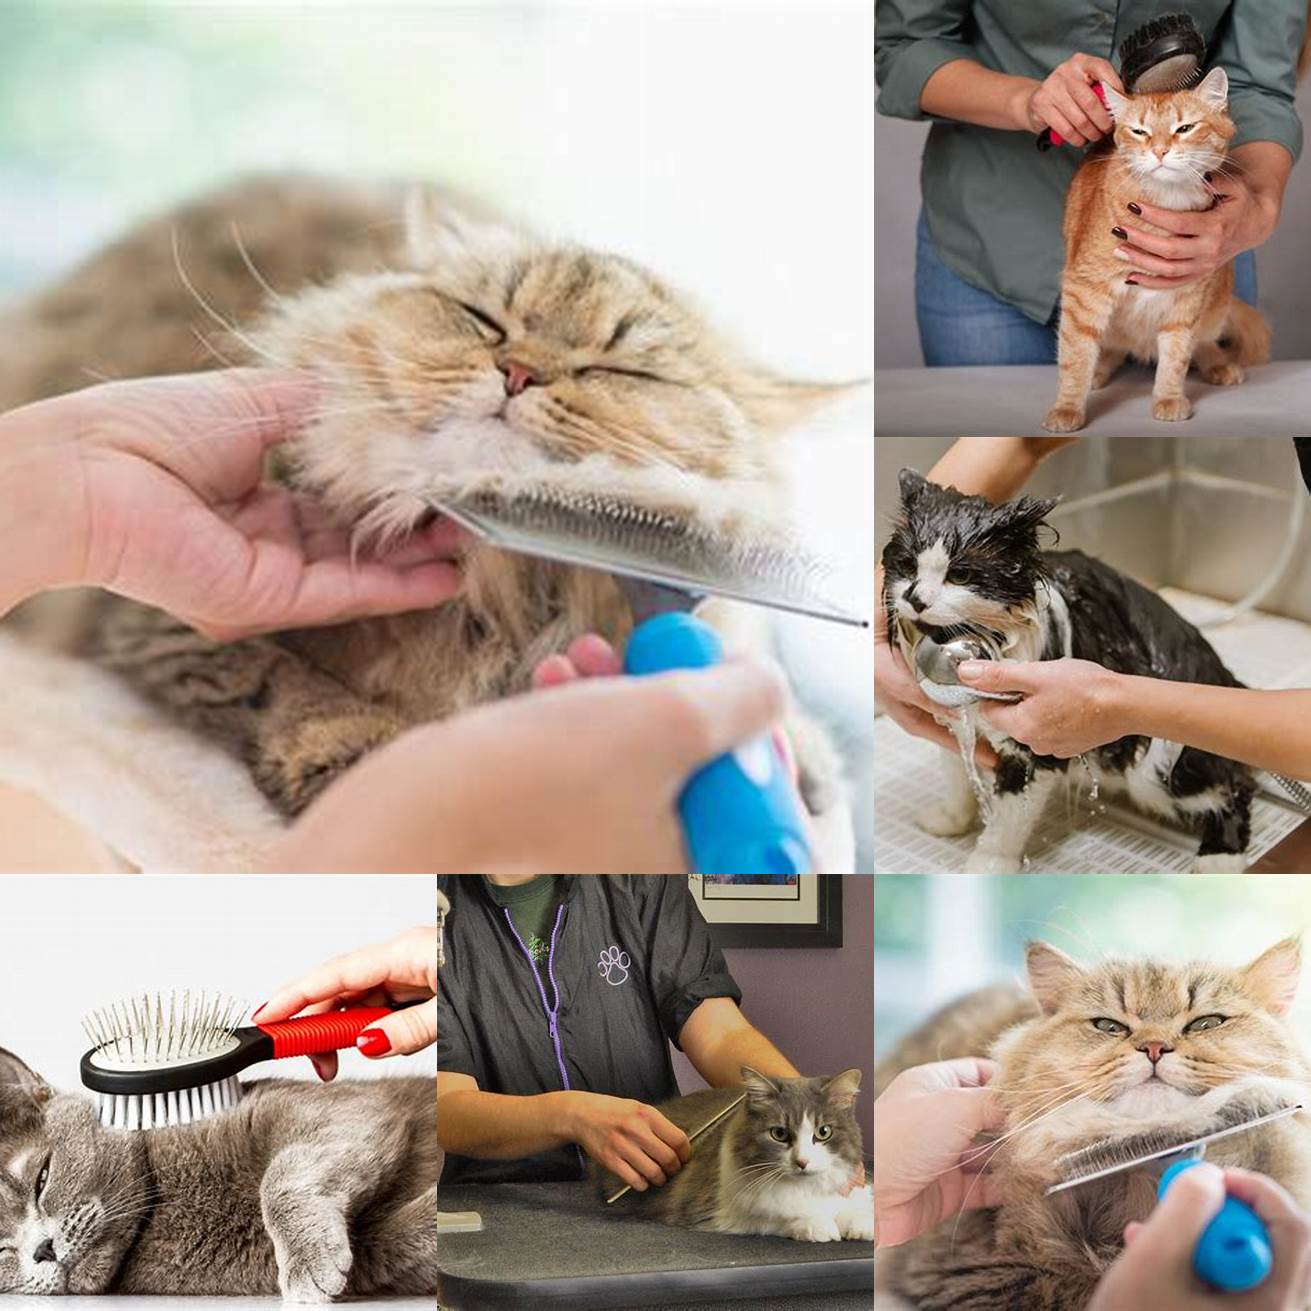 Regularly groom and care for your cat